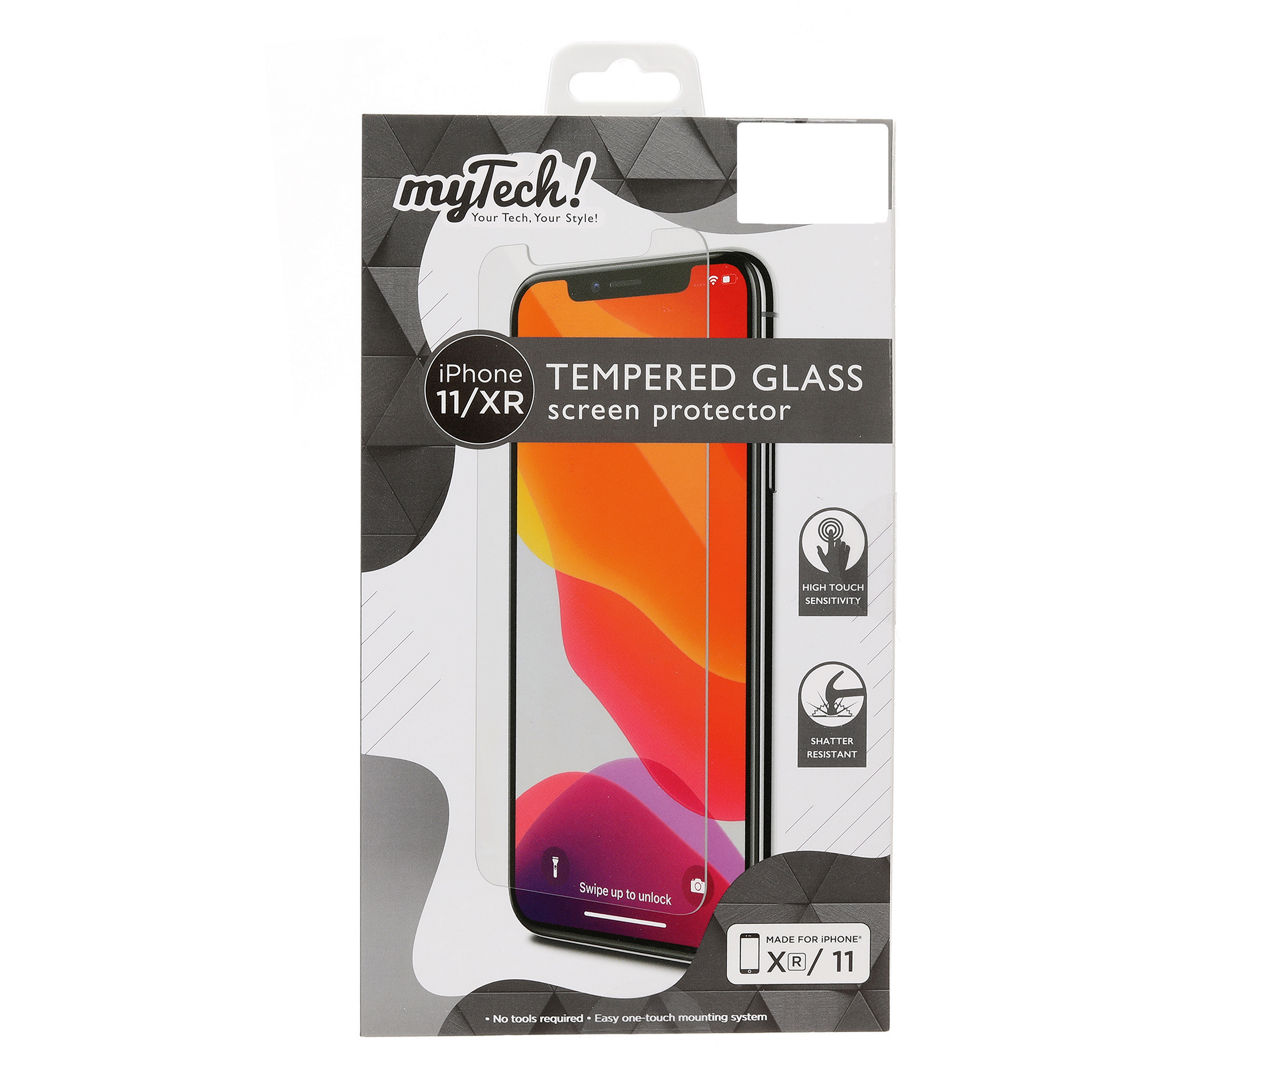 Tempered Glass iPhone 11/XR Screen Protector